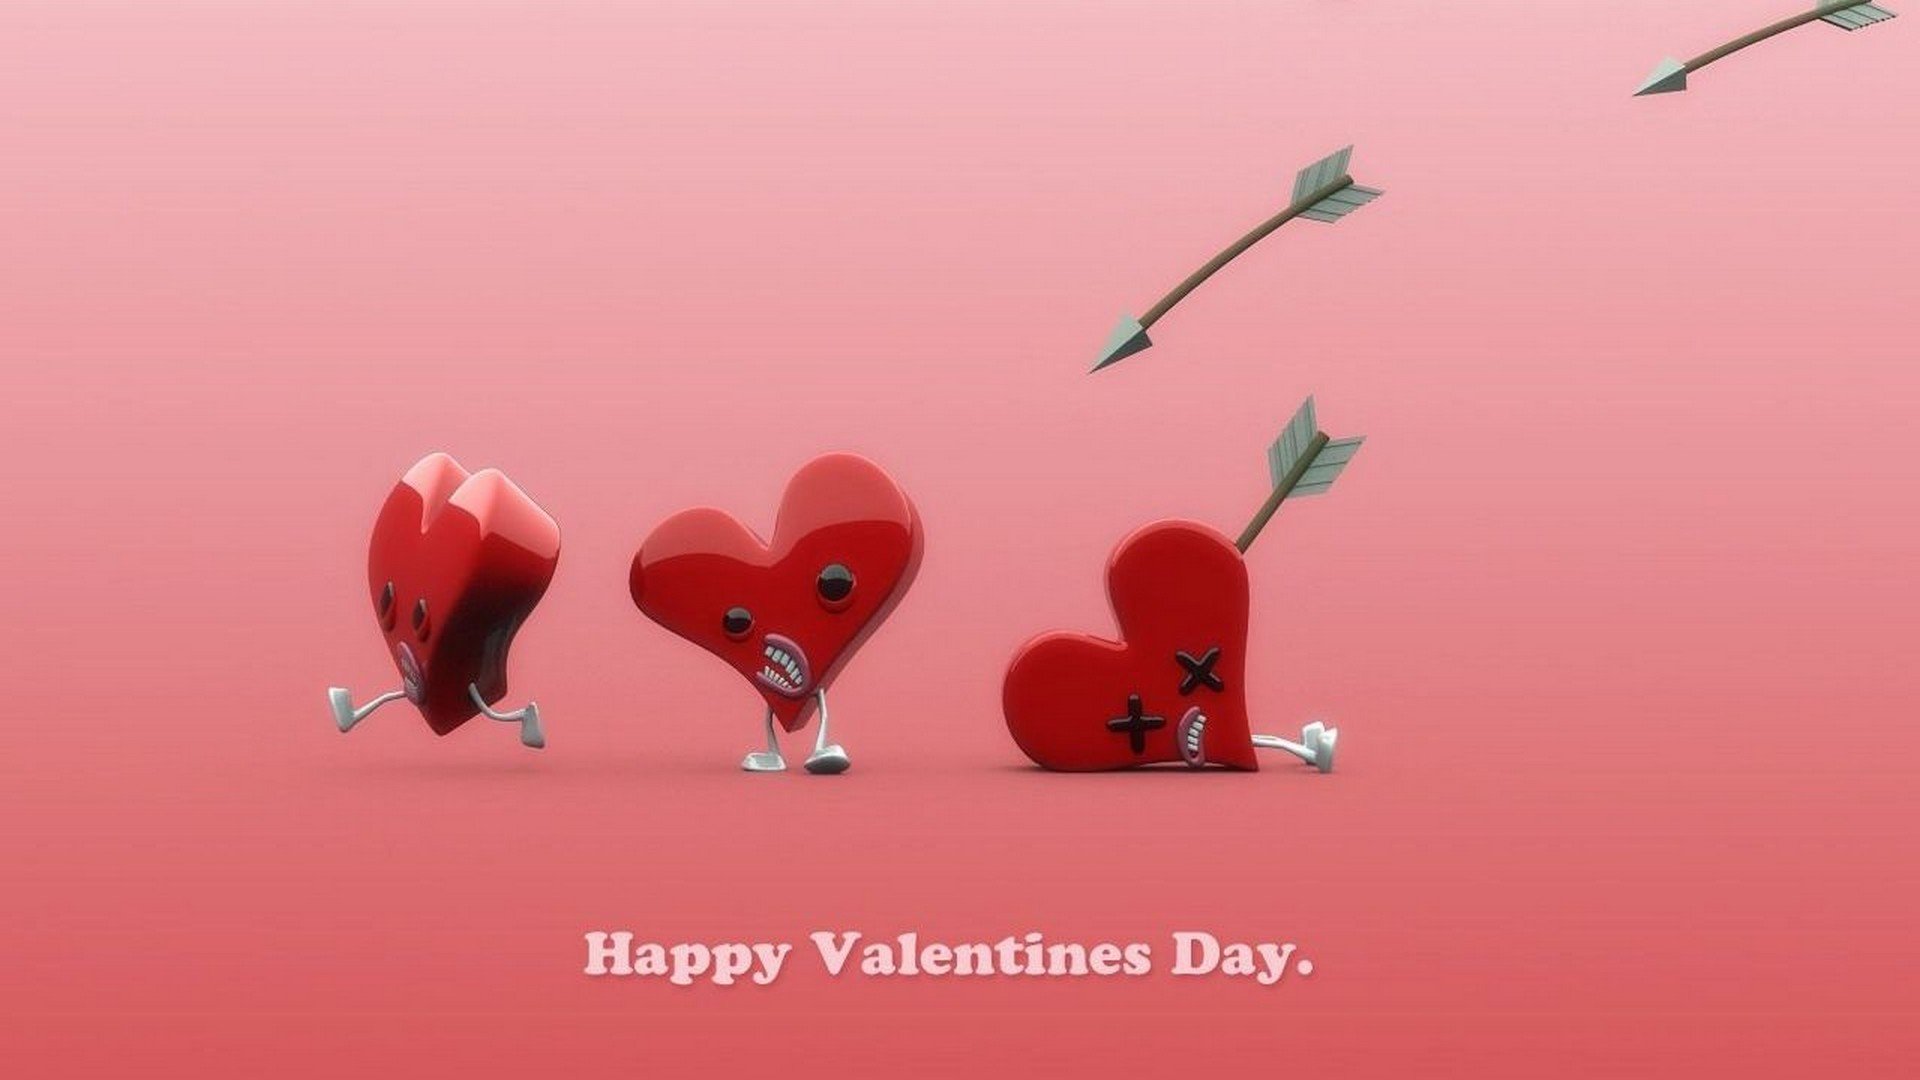 Find more Free download Animated Valentines Day Wallpaper 2020 Cute. 